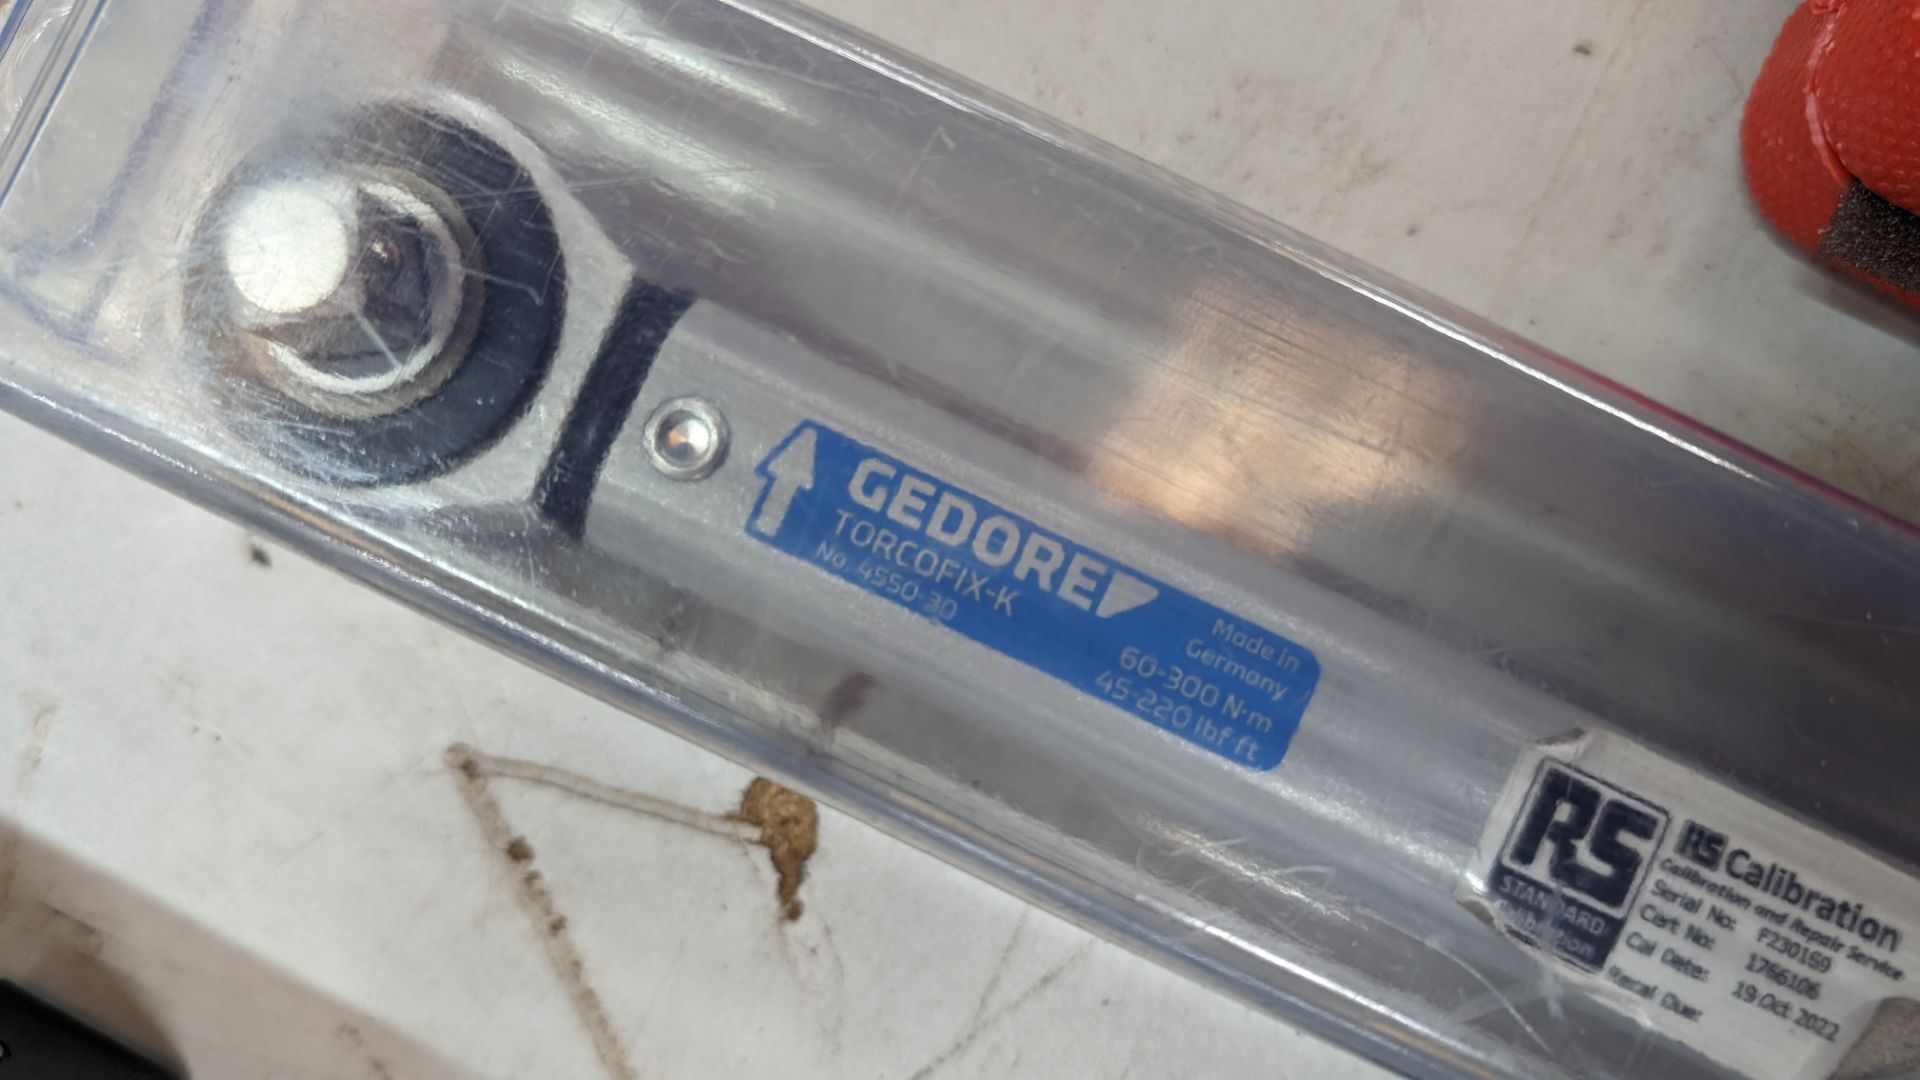 Gedore Torcofix-K torque wrench - Image 4 of 7